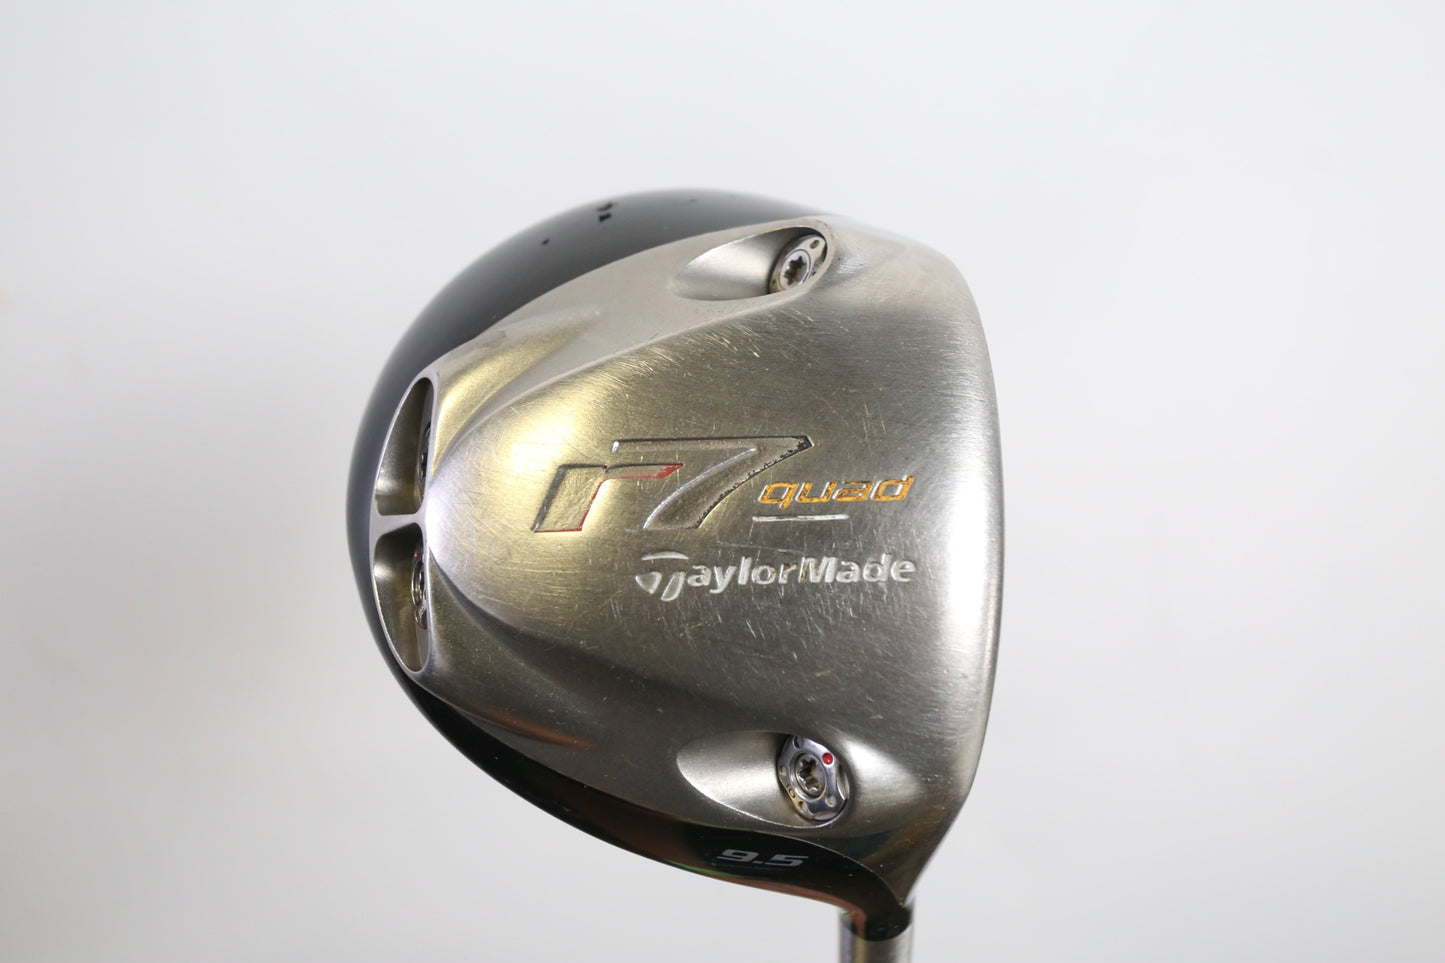 Used TaylorMade r7 quad Driver - Right-Handed - 9.5 Degrees - Stiff Flex